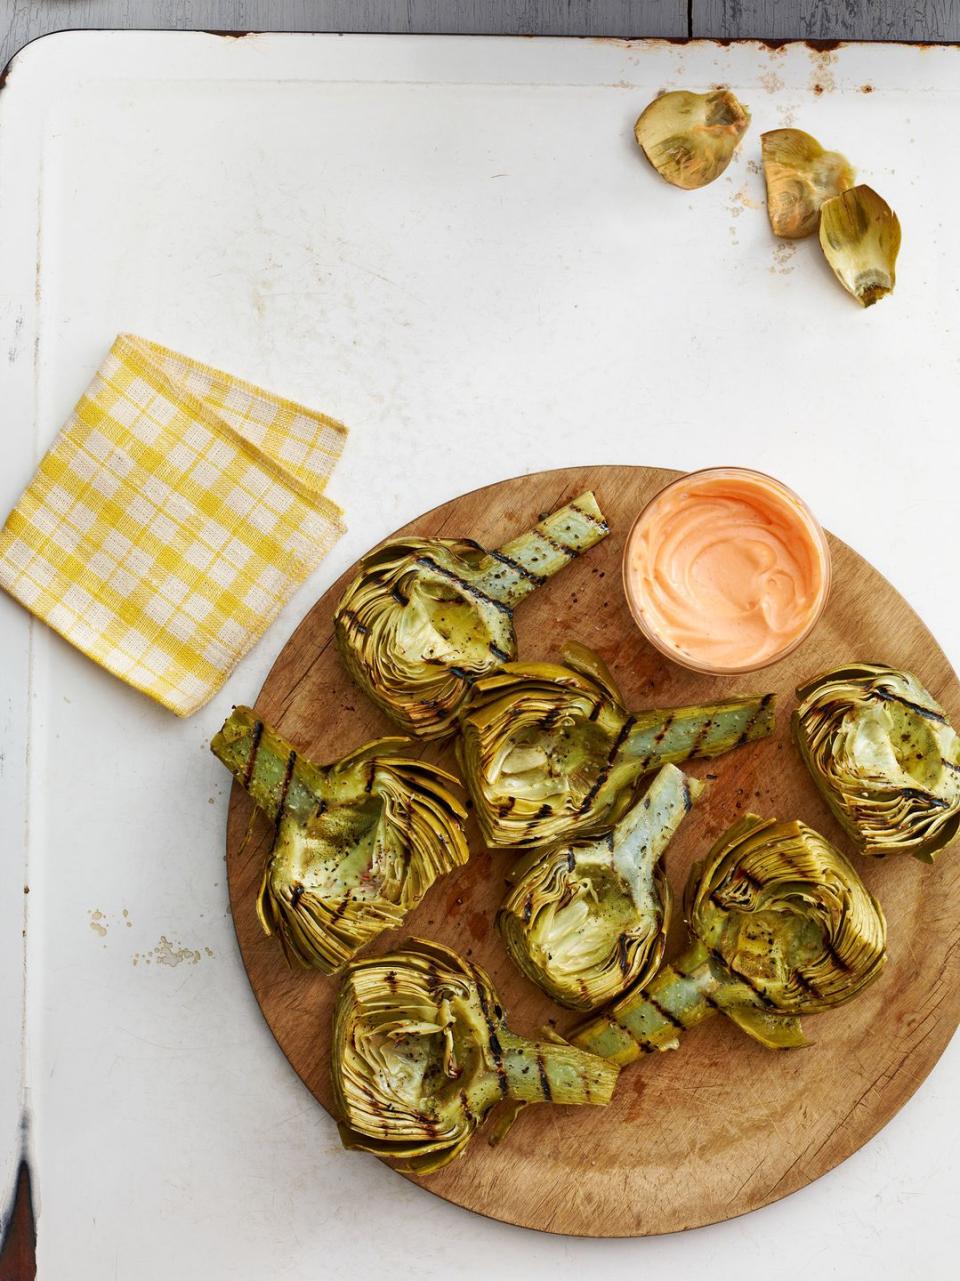 12) Grilled Artichokes with Harissa-Honey Dip